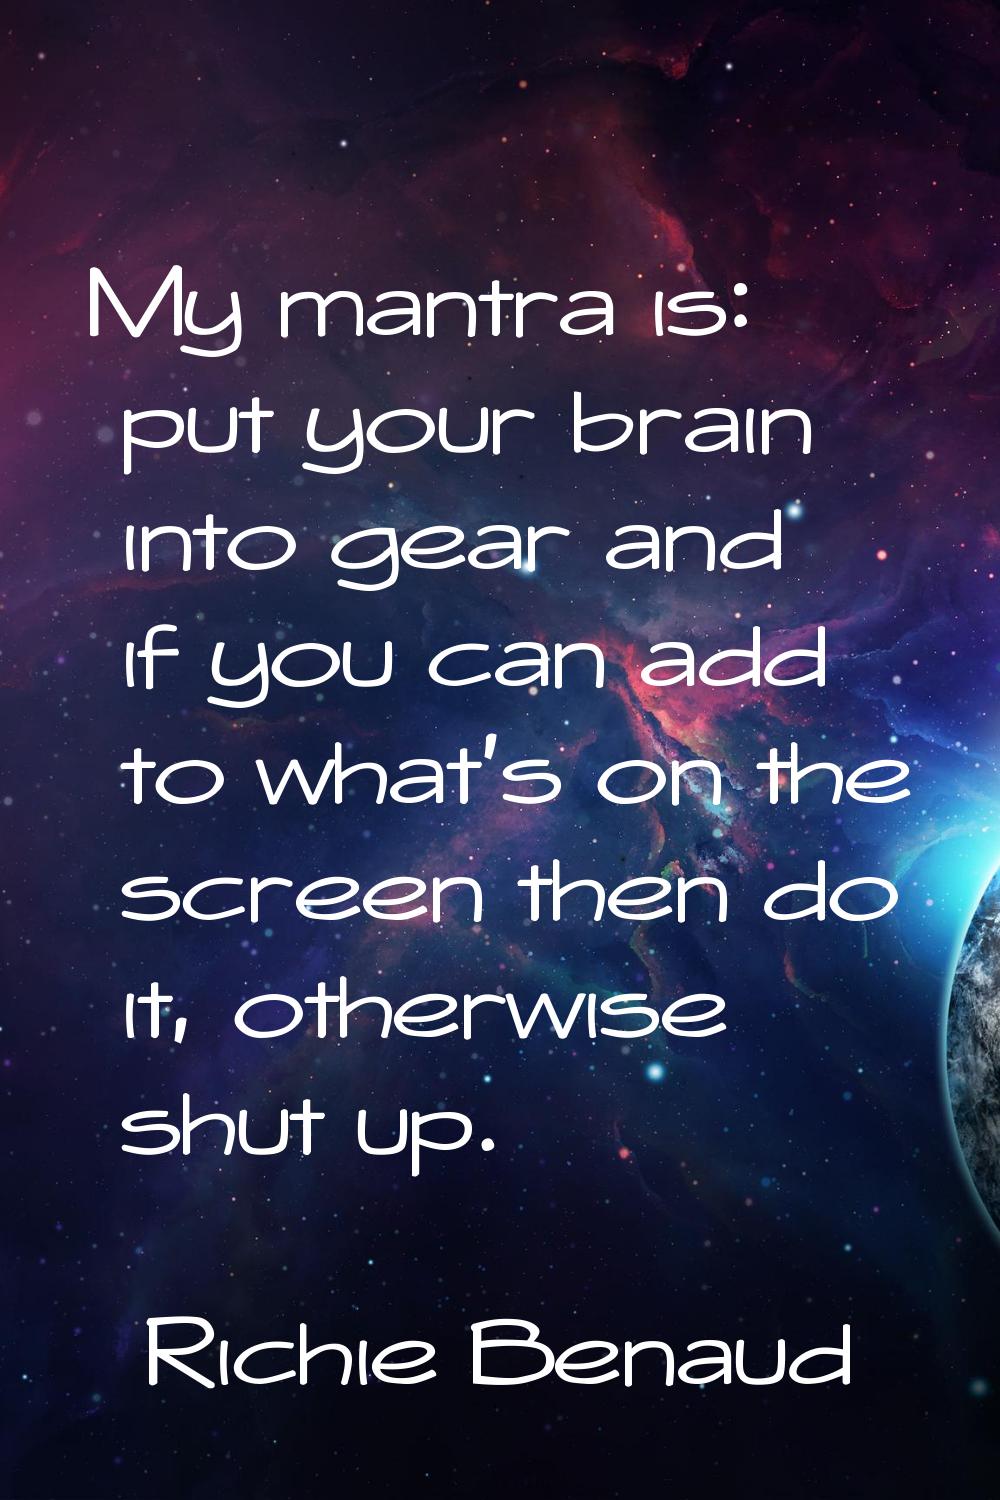 My mantra is: put your brain into gear and if you can add to what's on the screen then do it, other